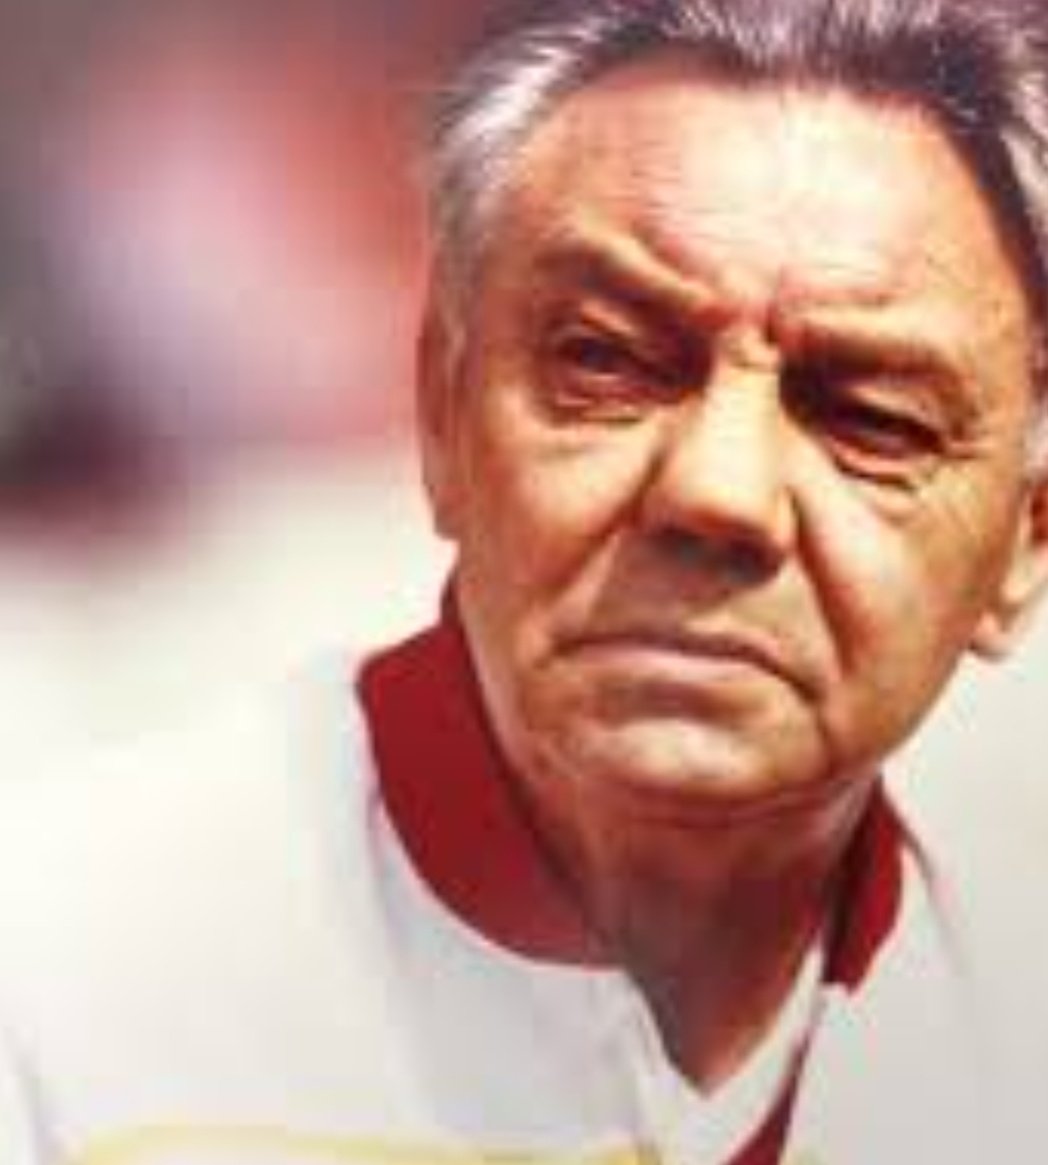 Joe fagan doesn’t get the recognition he truly deserves.
The first English manager to win three major trophies in a single season 
#LFCFamily